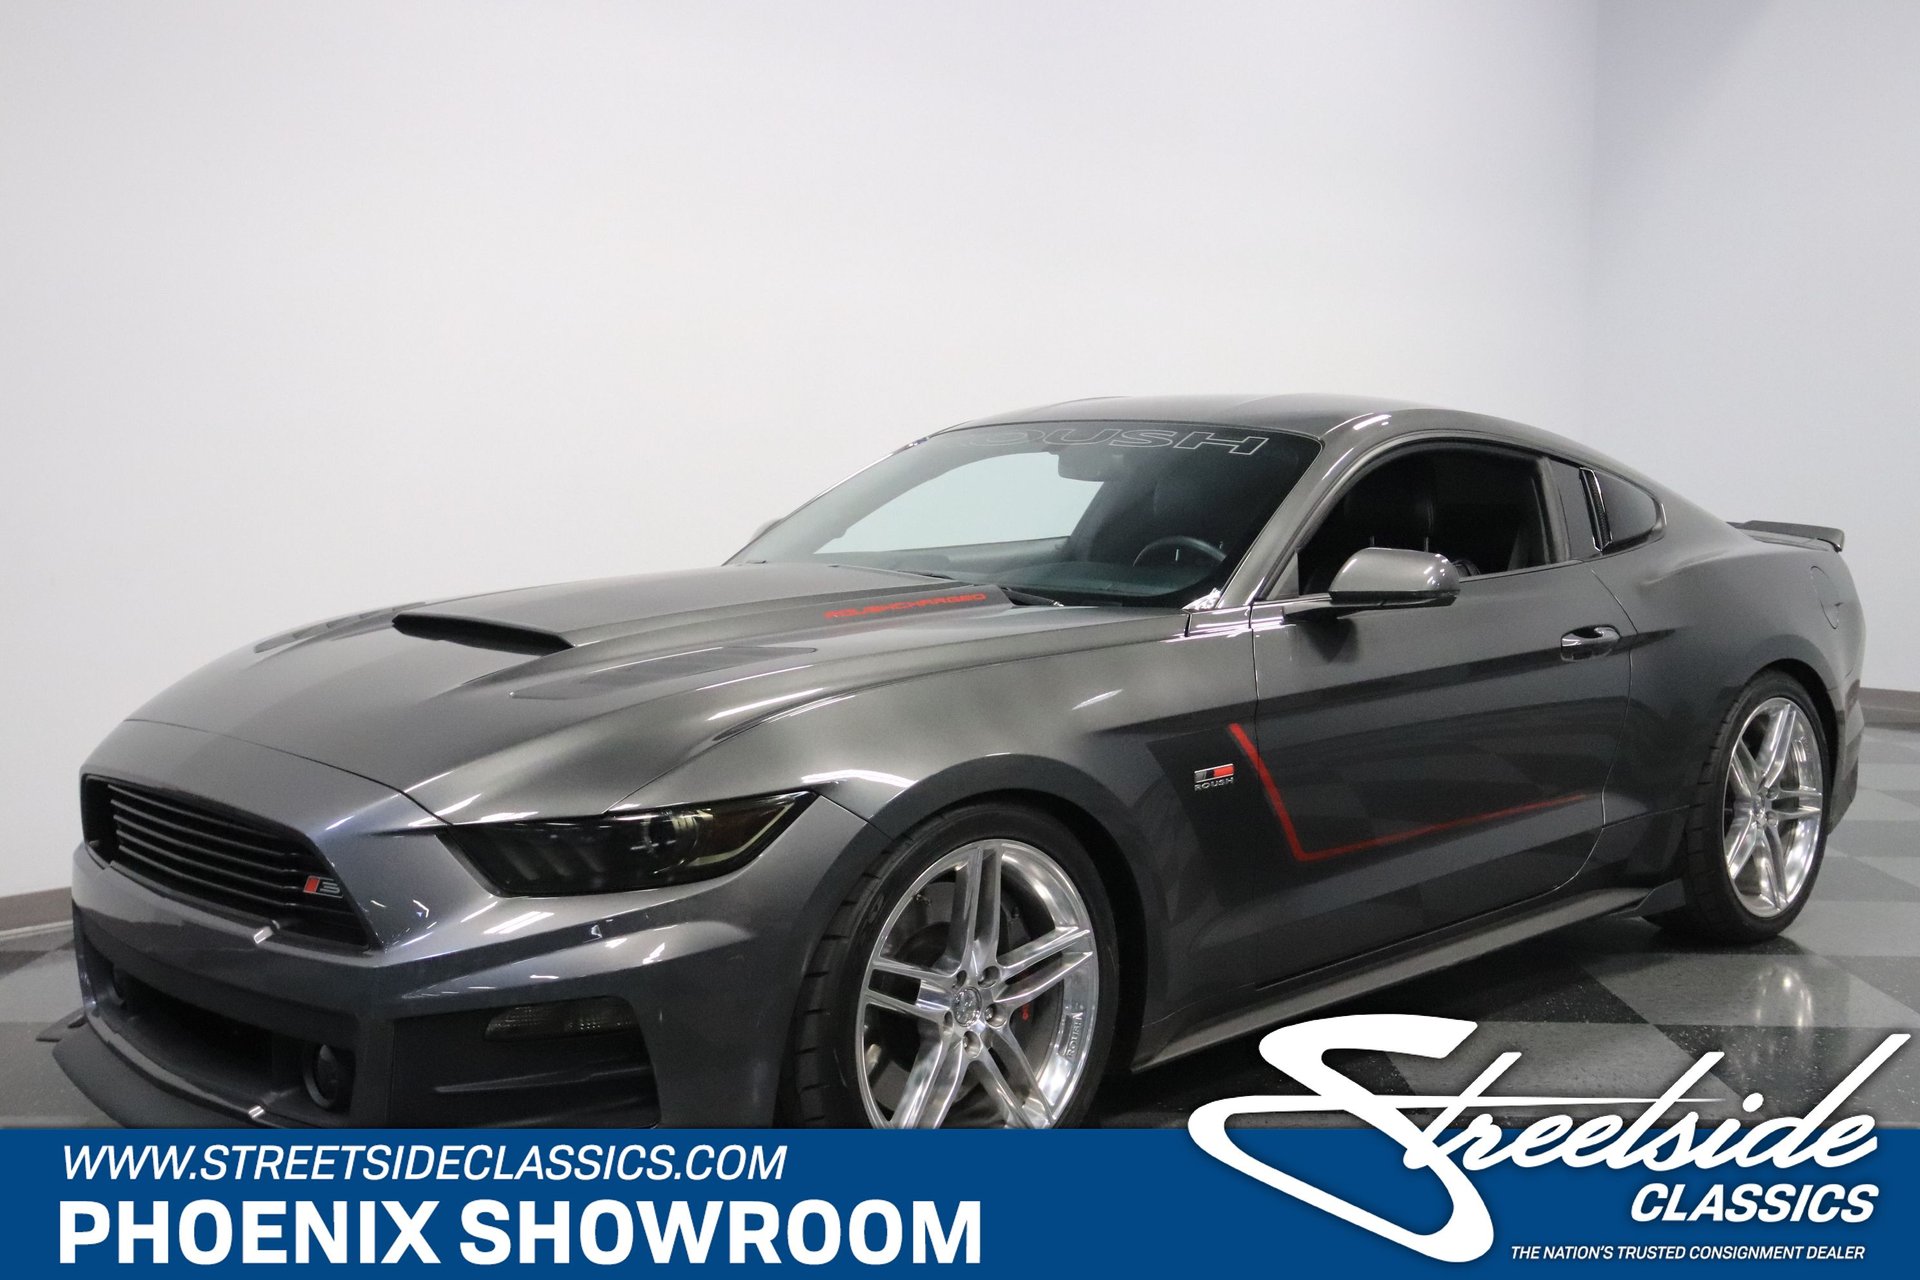 2015 Ford Mustang | Classic Cars for Sale - Streetside Classics